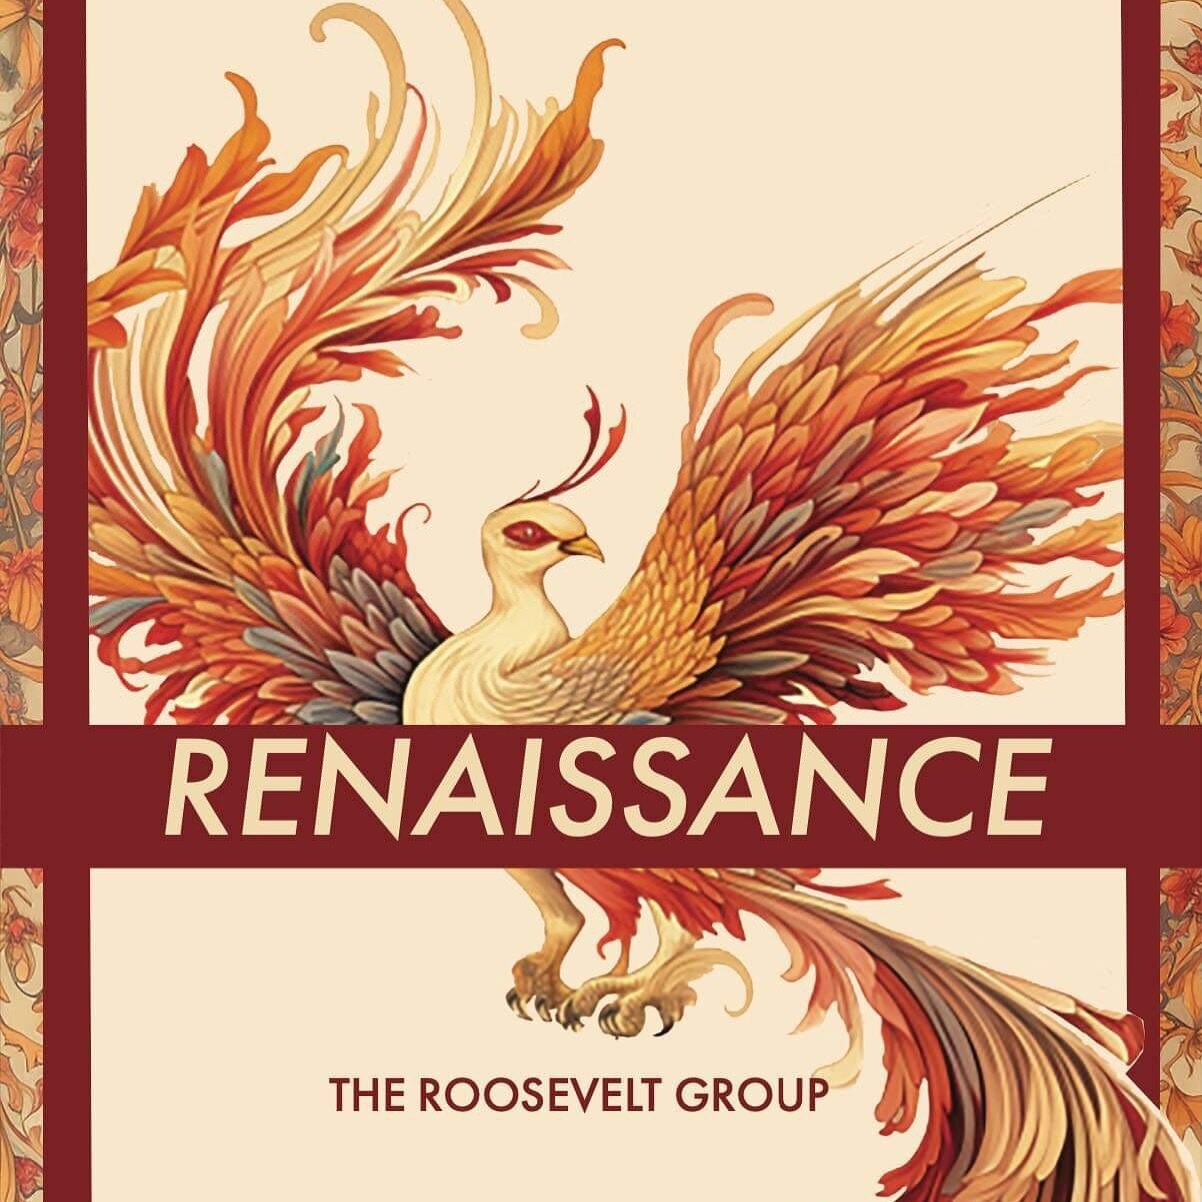 The Roosevelt Group is proud to announce the launch of our New Annales VI!

We would like to extend a huge thank everyone who contributed to and wrote for this issue. With the theme of Renaissance representing rebirth, revitalization, and renewal, we